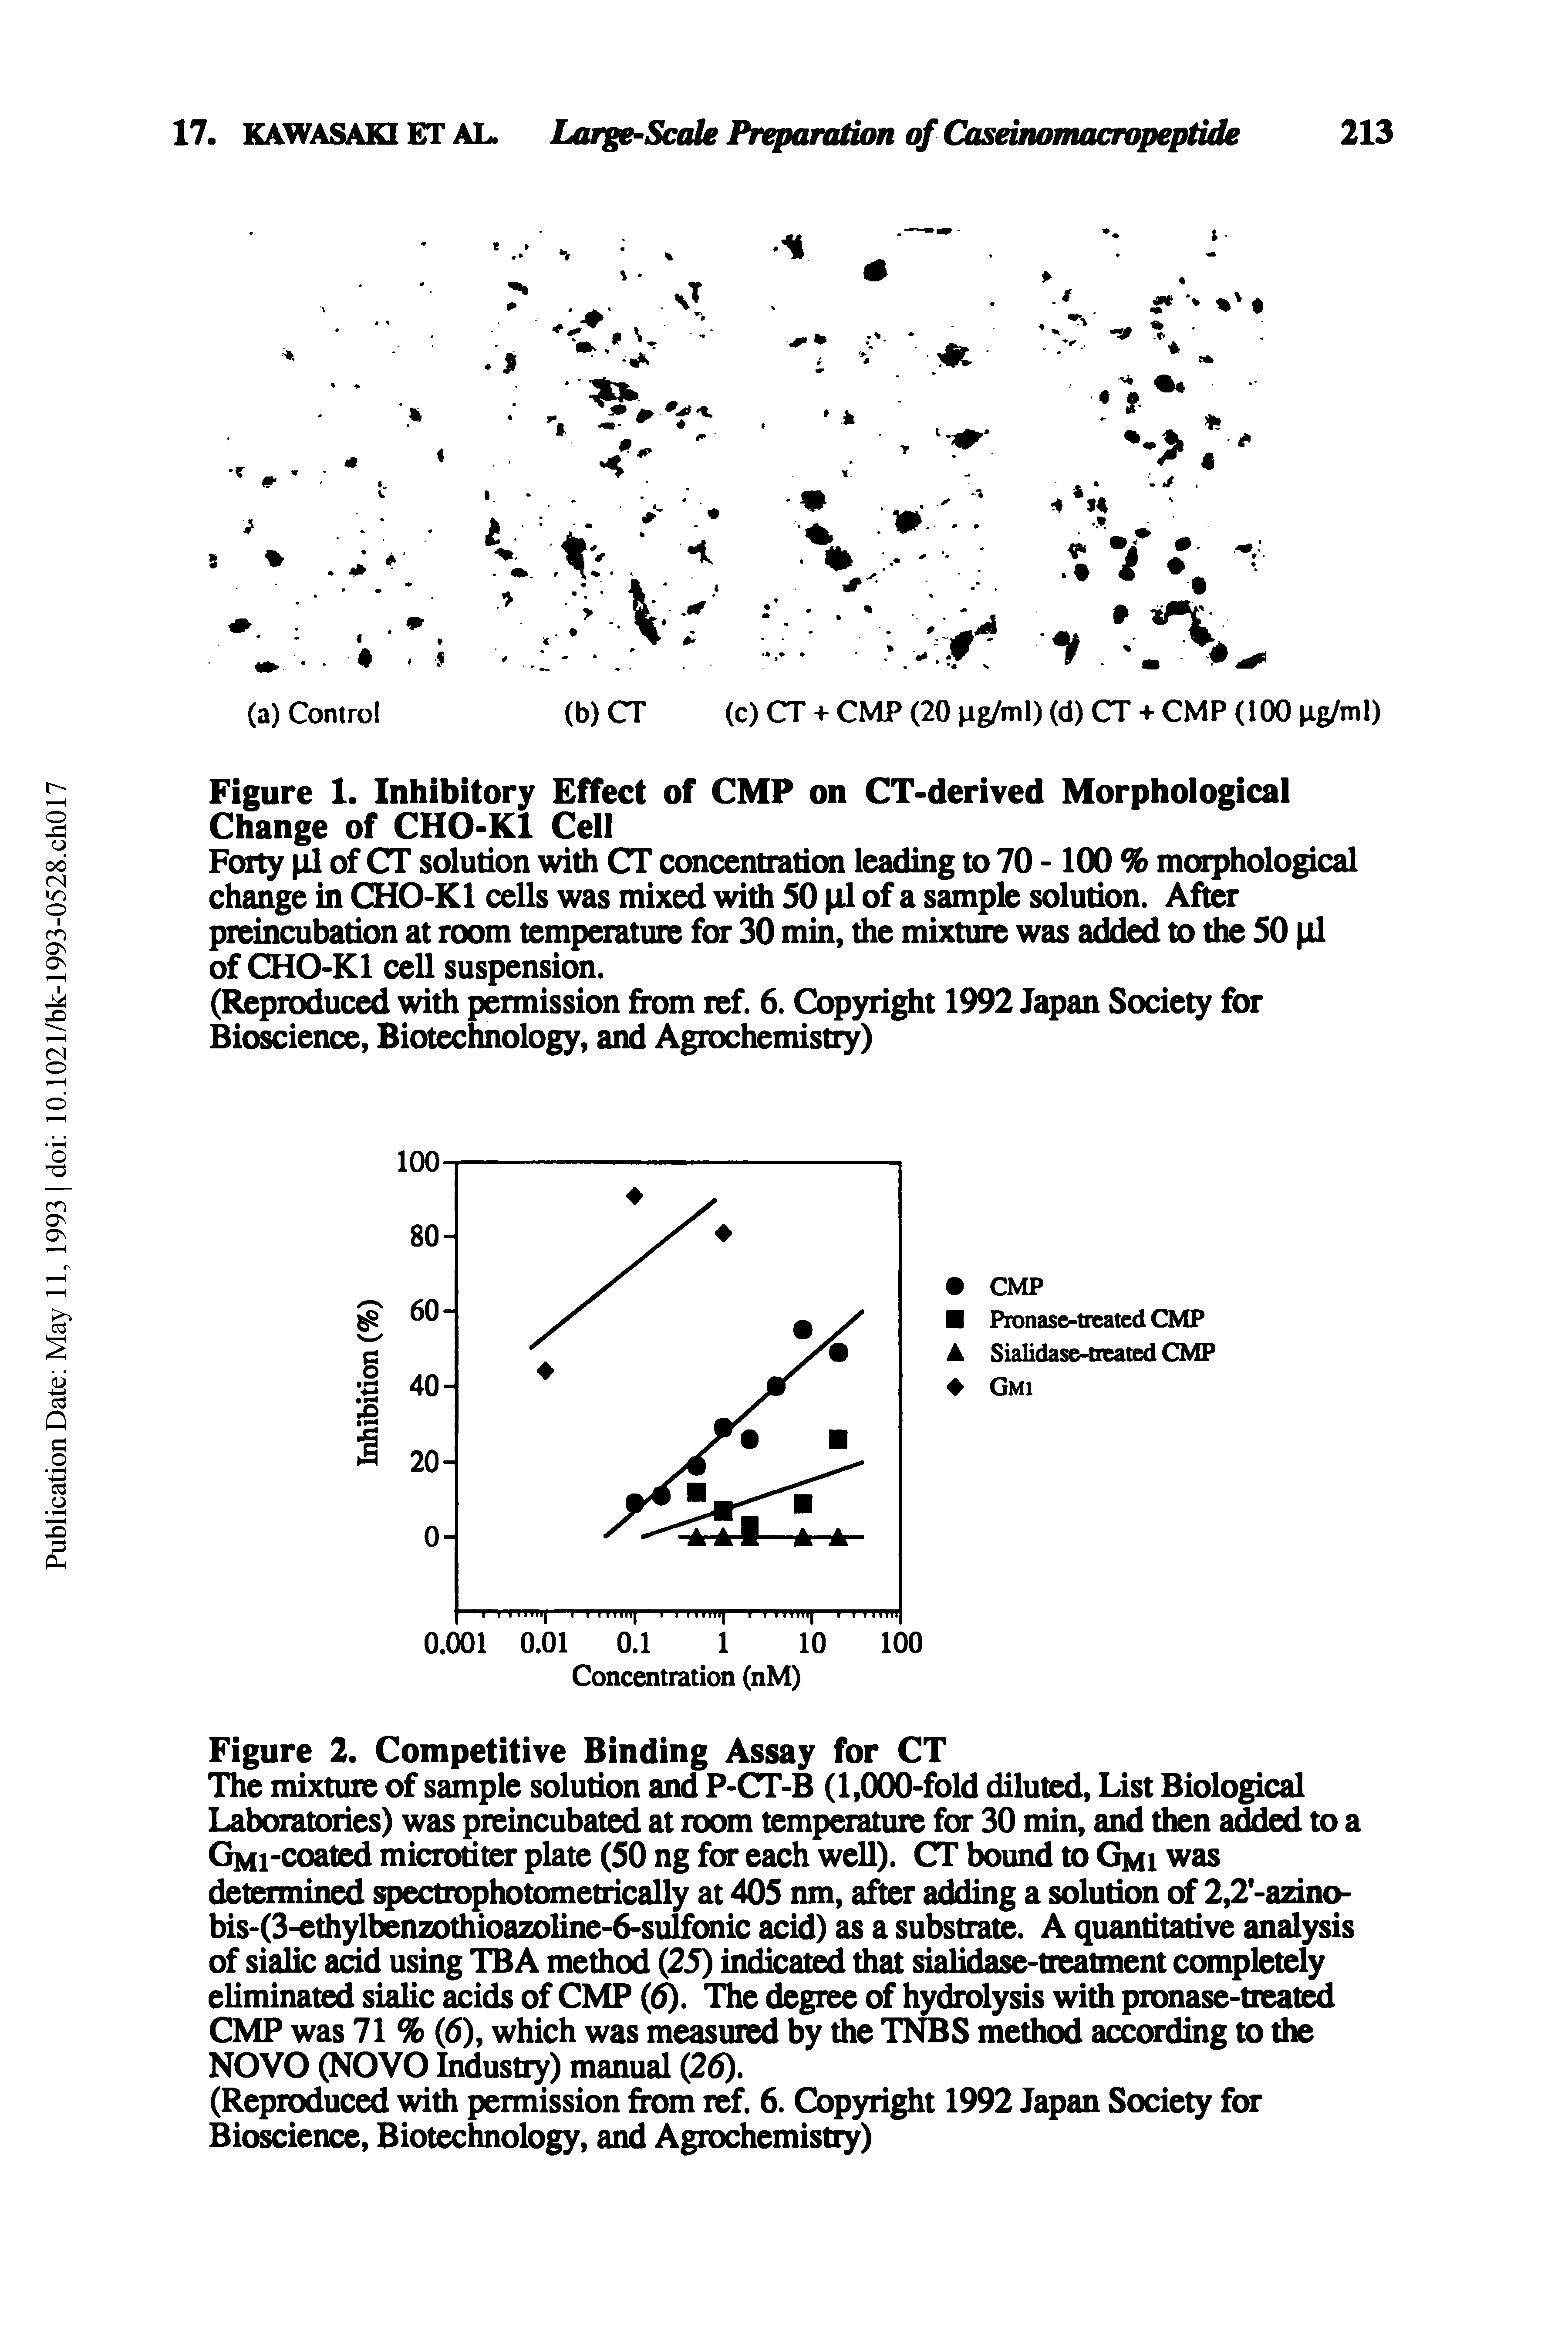 Figure 2. Competitive Binding Assay for CT The mixture of sample solution and P-CT-B (l,(XX)-fold diluted. List Biological Laboratories) was preincubated at room temperature for 30 min, and then added to a GMi-coated microtiter plate (50 ng for each well). CT bound to Gmi was determined spectrophotometrically at 405 nm, after adding a solution of 2,2 -azino-bis-p-ethylbenzothioazoline-6-sulfonic acid) as a substrate. A quantitative analysis of sialic acid using TB A method (25) indicate that sialidase-treatment completely eliminated sialic acids of CMP (6). The degree of hydrolysis with pronase-treat CMP was 71 % (6), which was measured by the TNBS method according to the NOVO (NOVO Industry) manual (26).